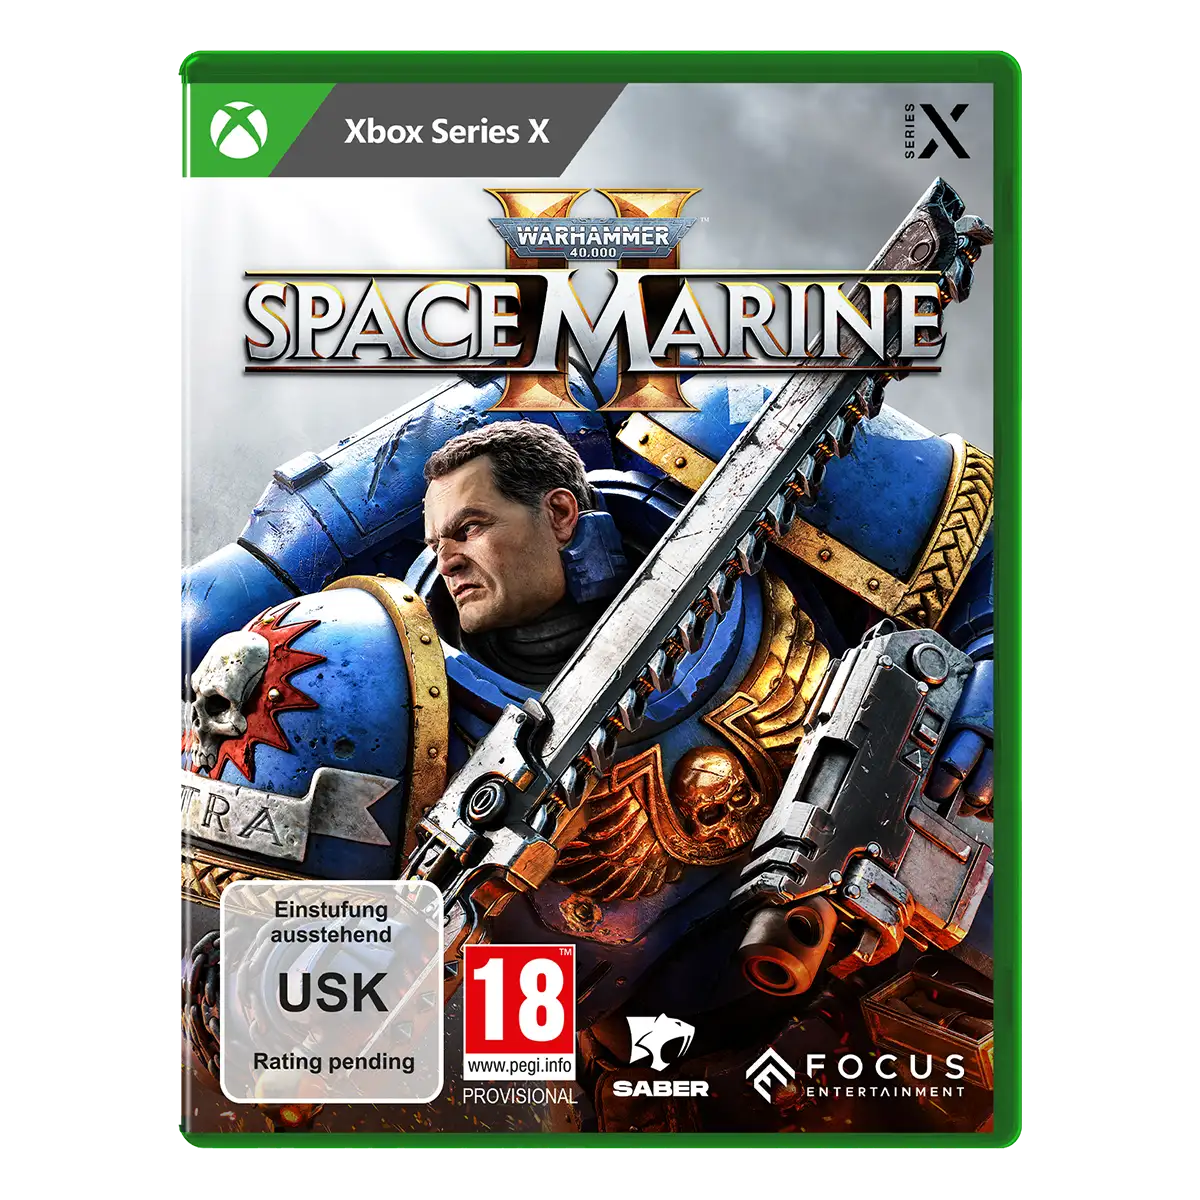 Warhammer 40,000: Space Marine 2 (XSRX) Cover